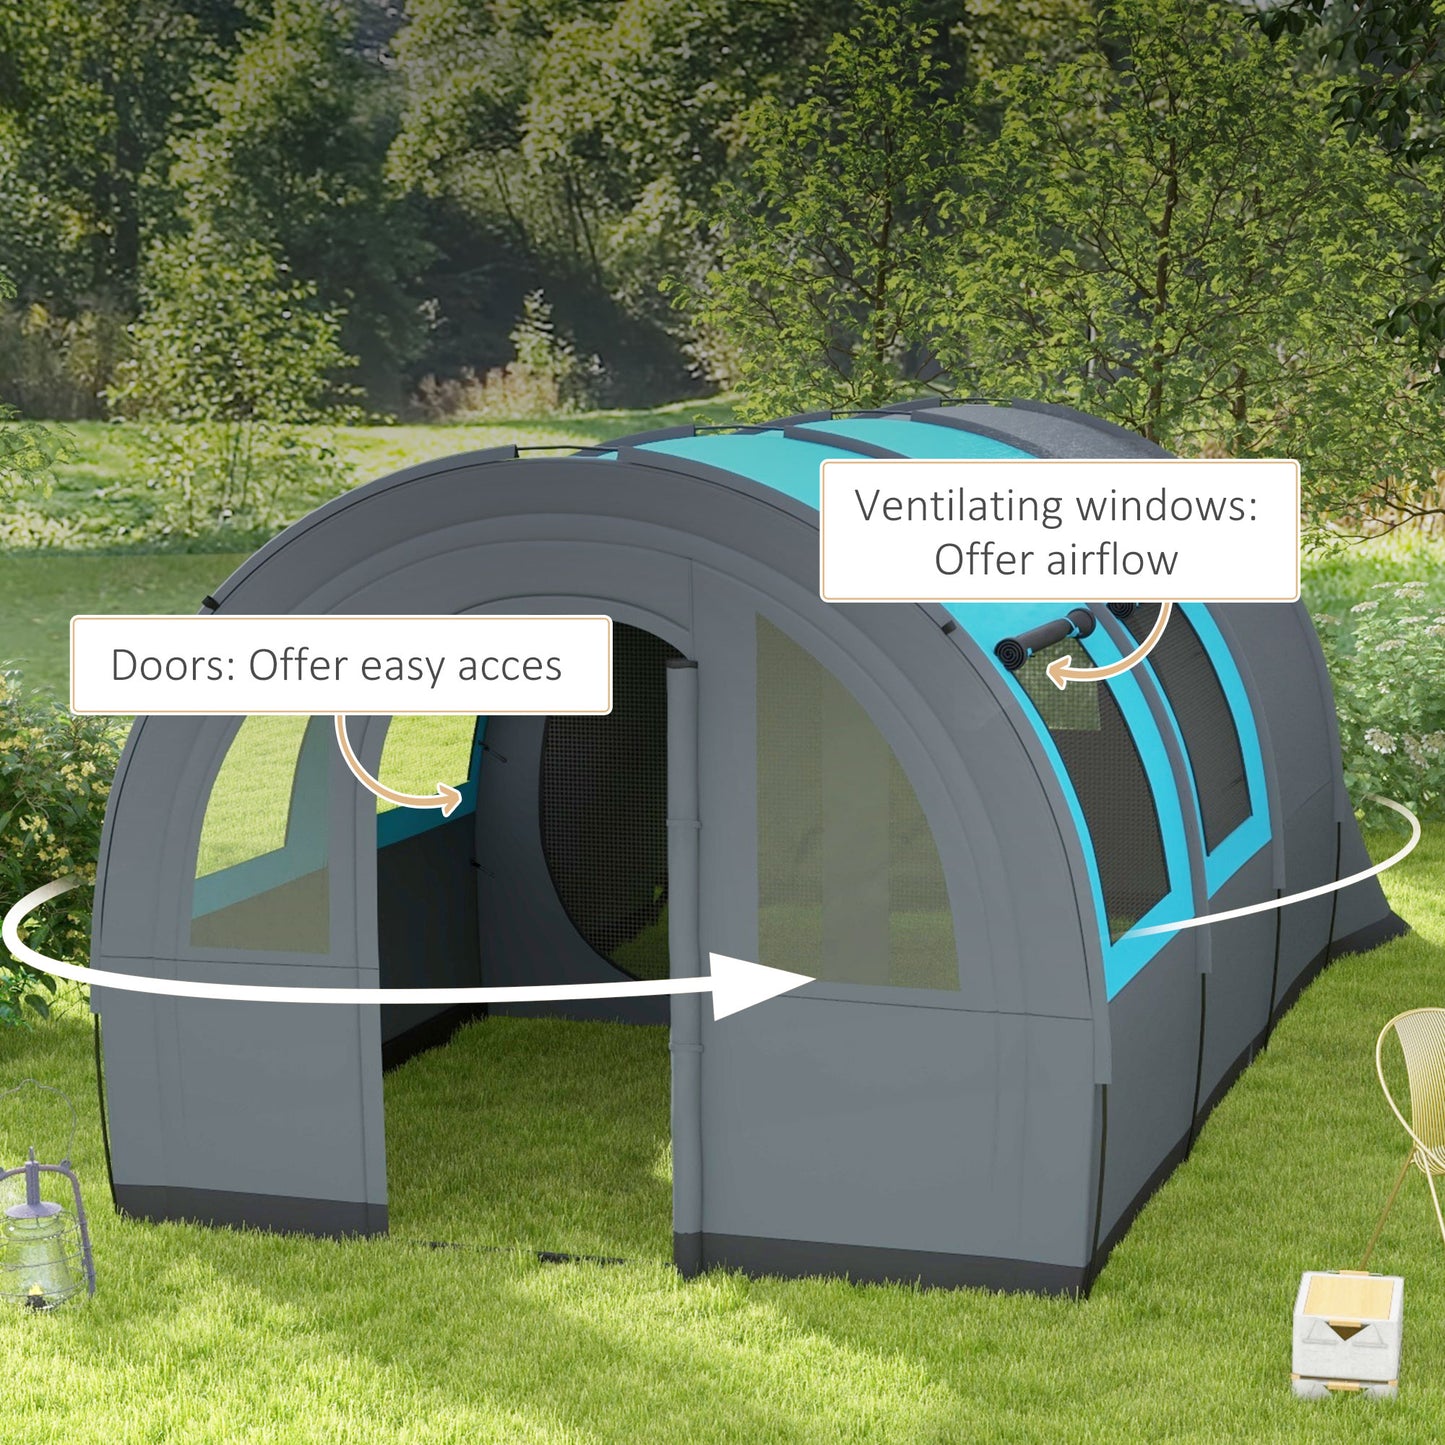 Outsunny 3000mm Waterproof Camping Tent 5-6 Man Family Tent with Living and Bedroom Carry Bag Included Grey and Blue